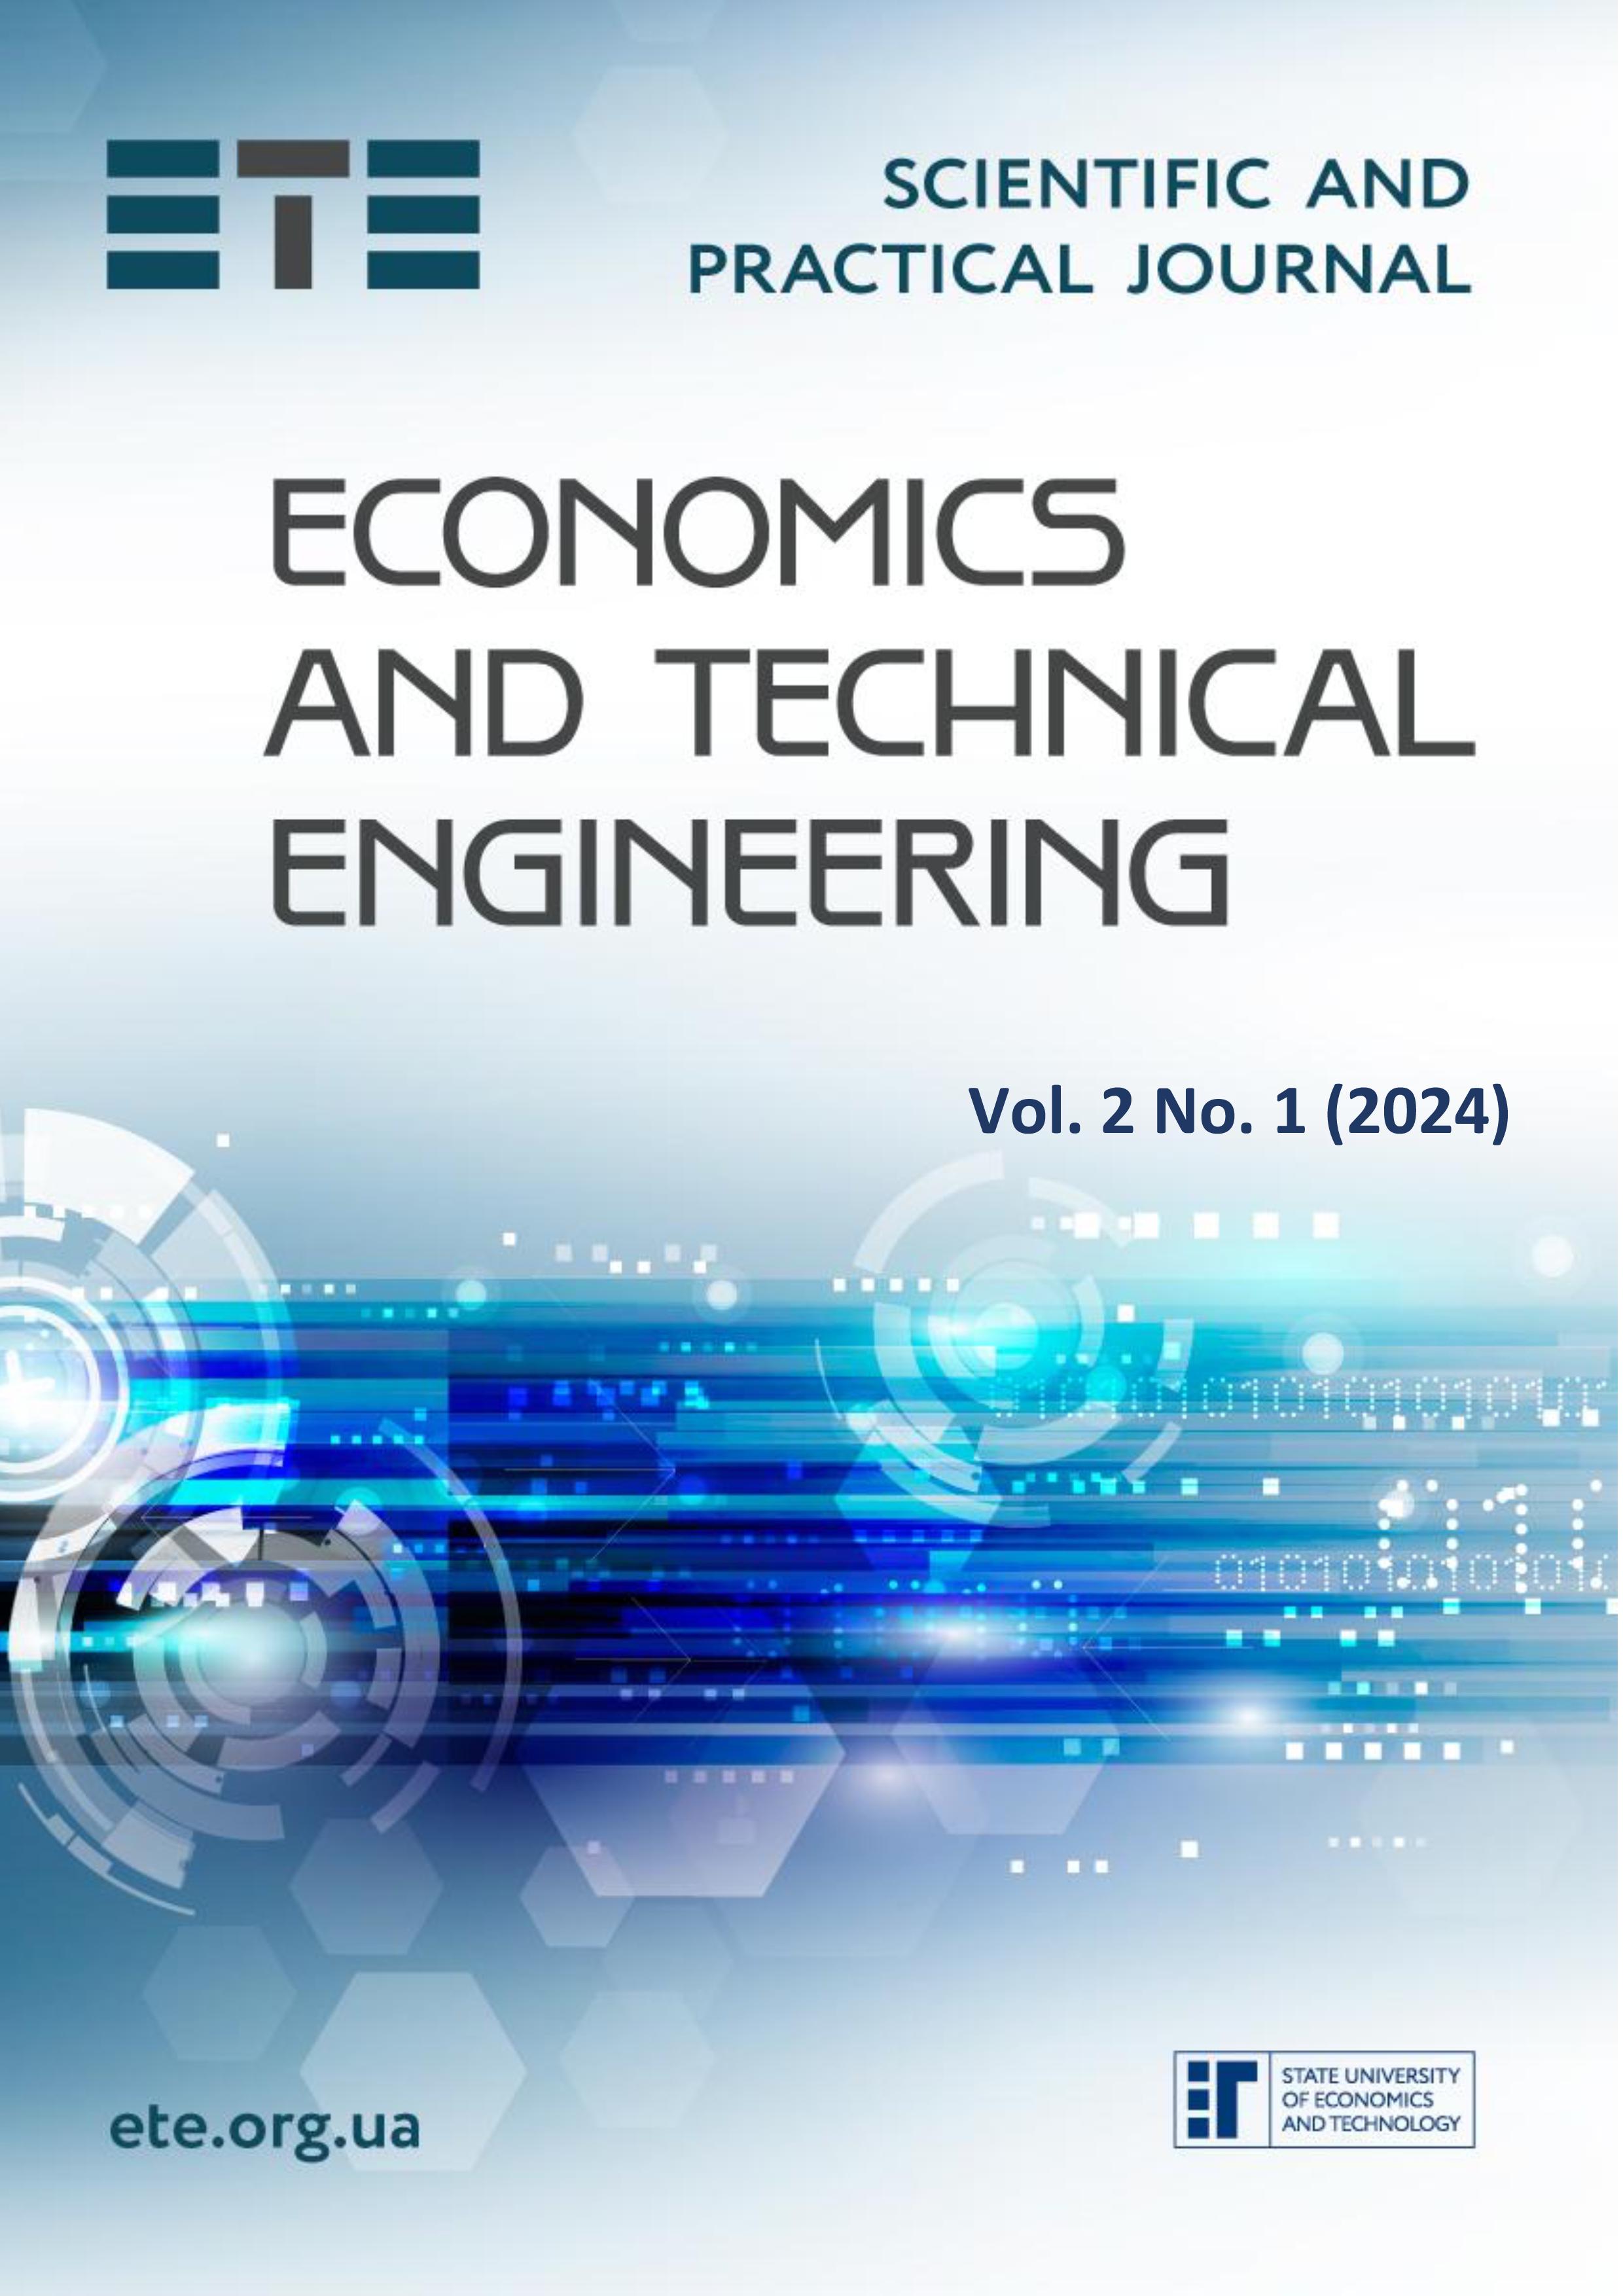 					View Vol. 2 No. 1 (2024): Economics and technical engineering
				